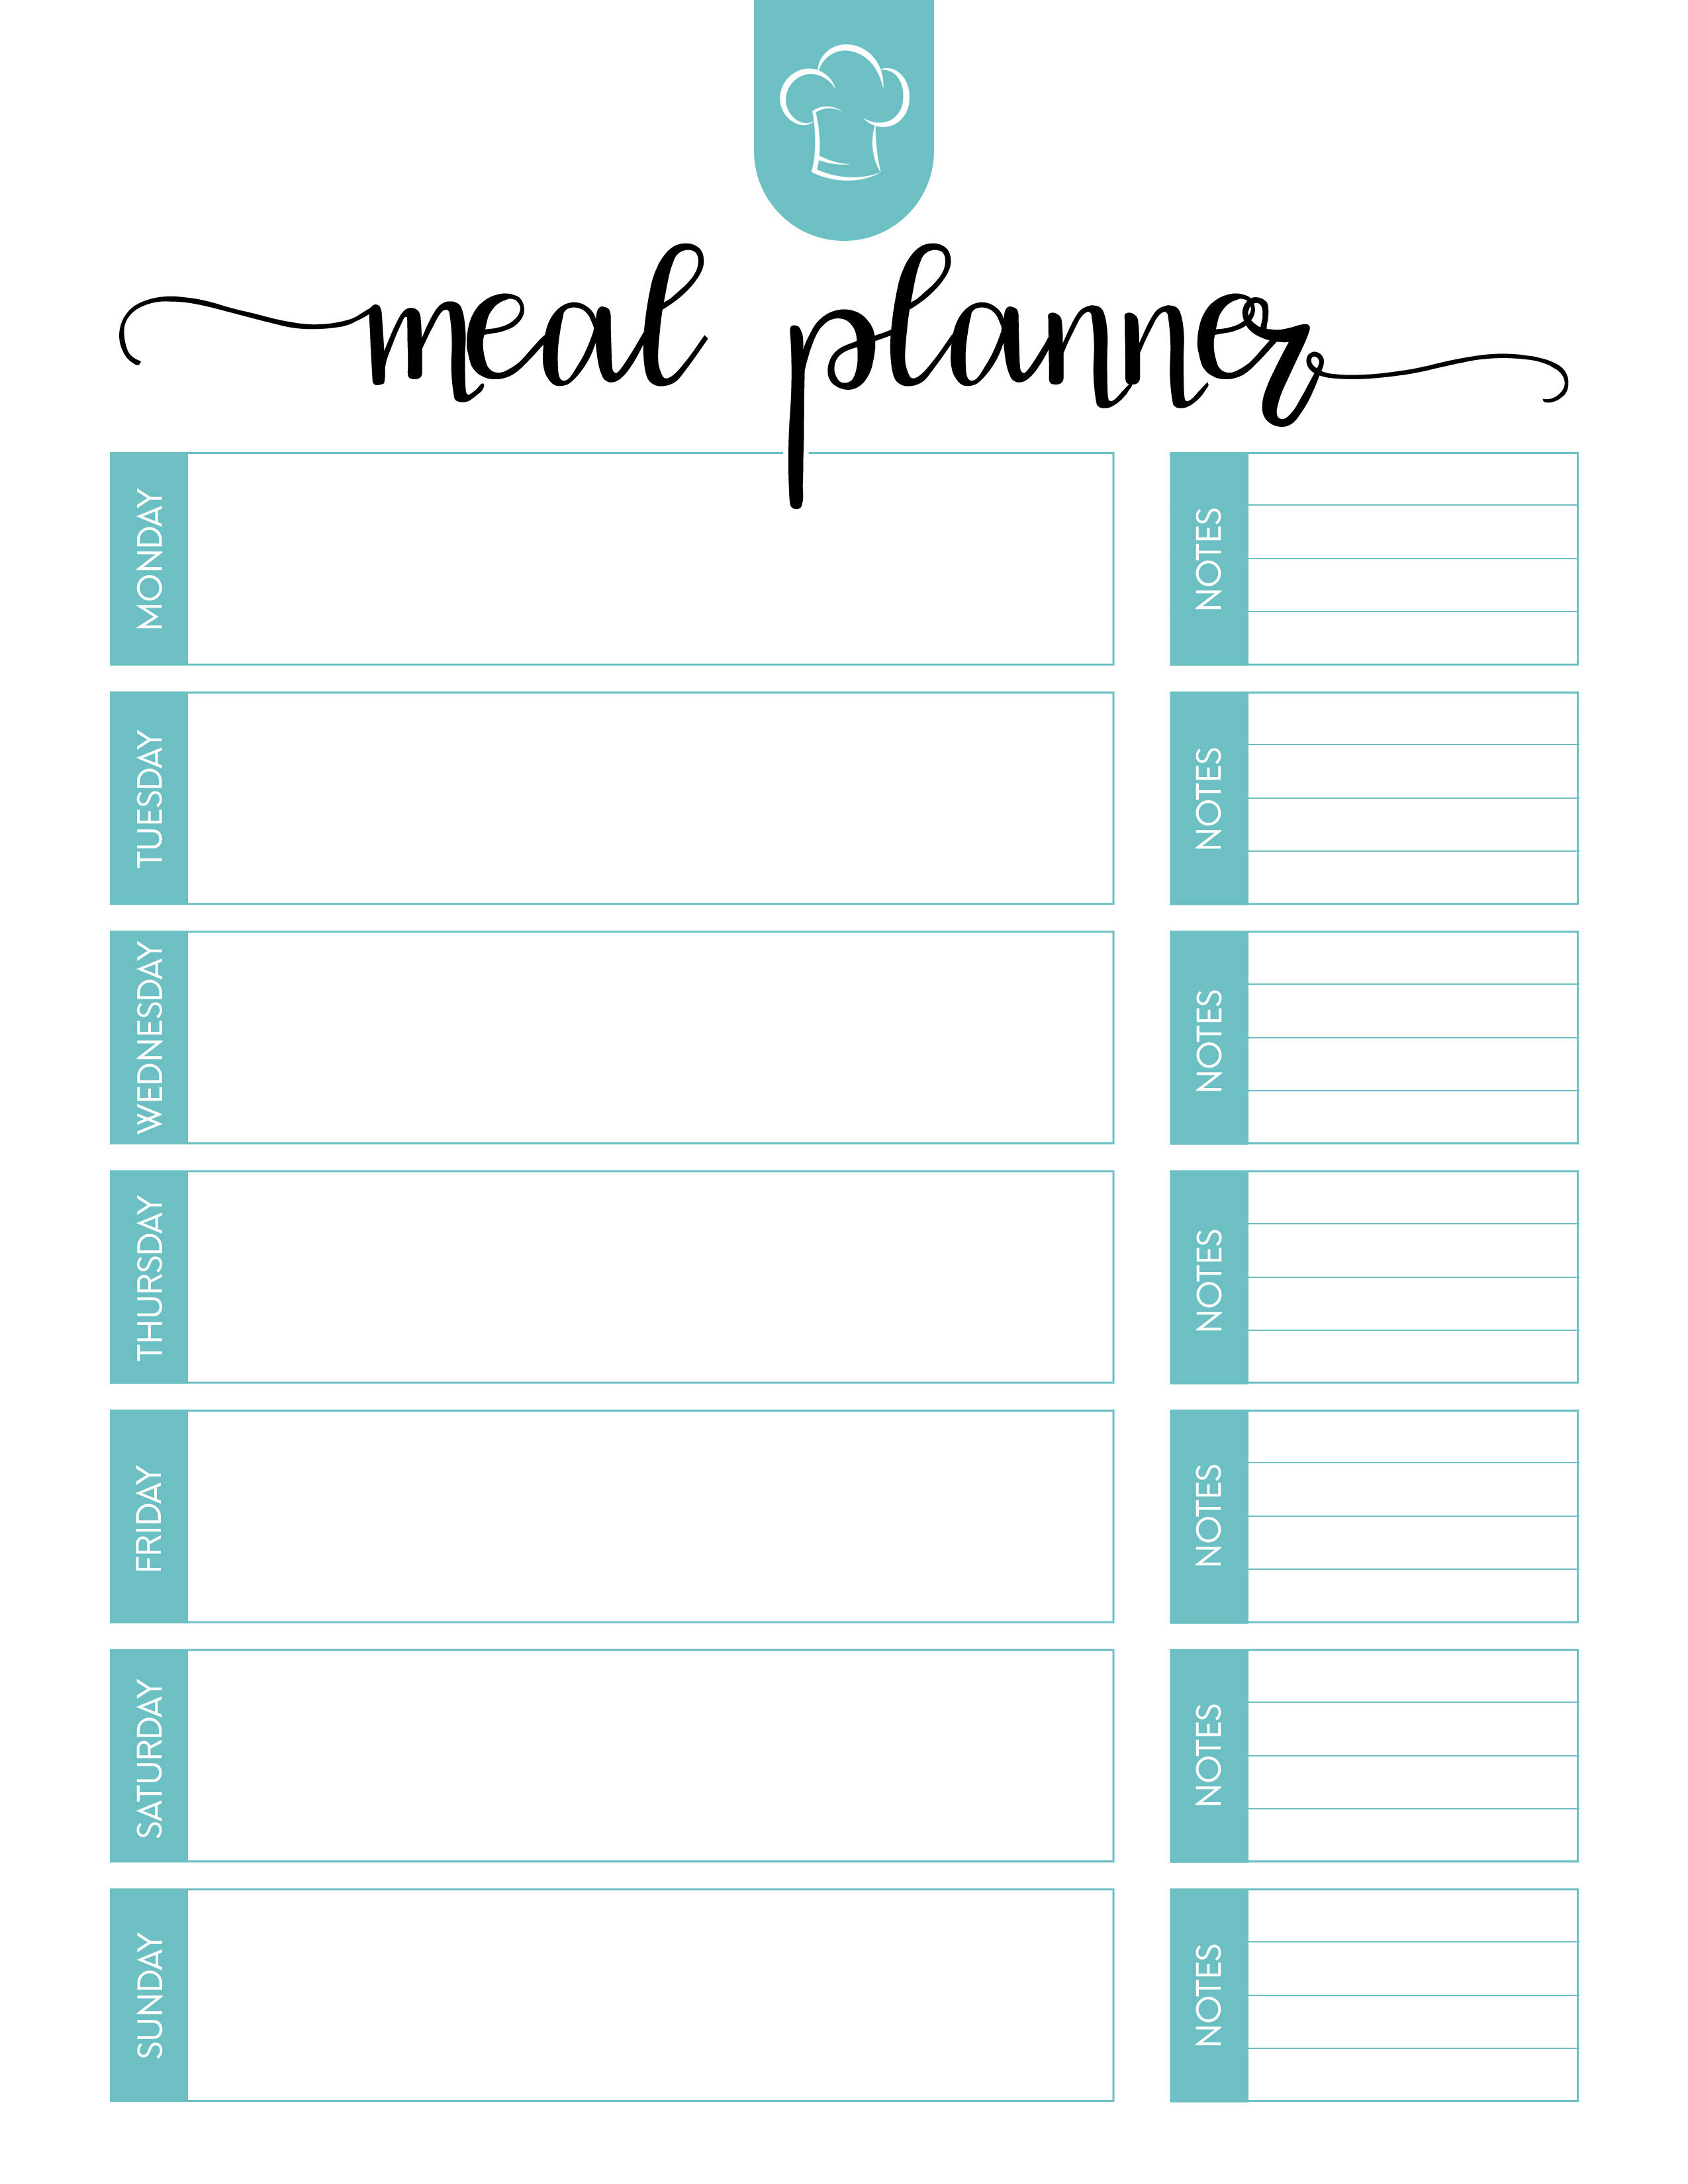 free-printable-weekly-meal-plan-template-paper-trail-design